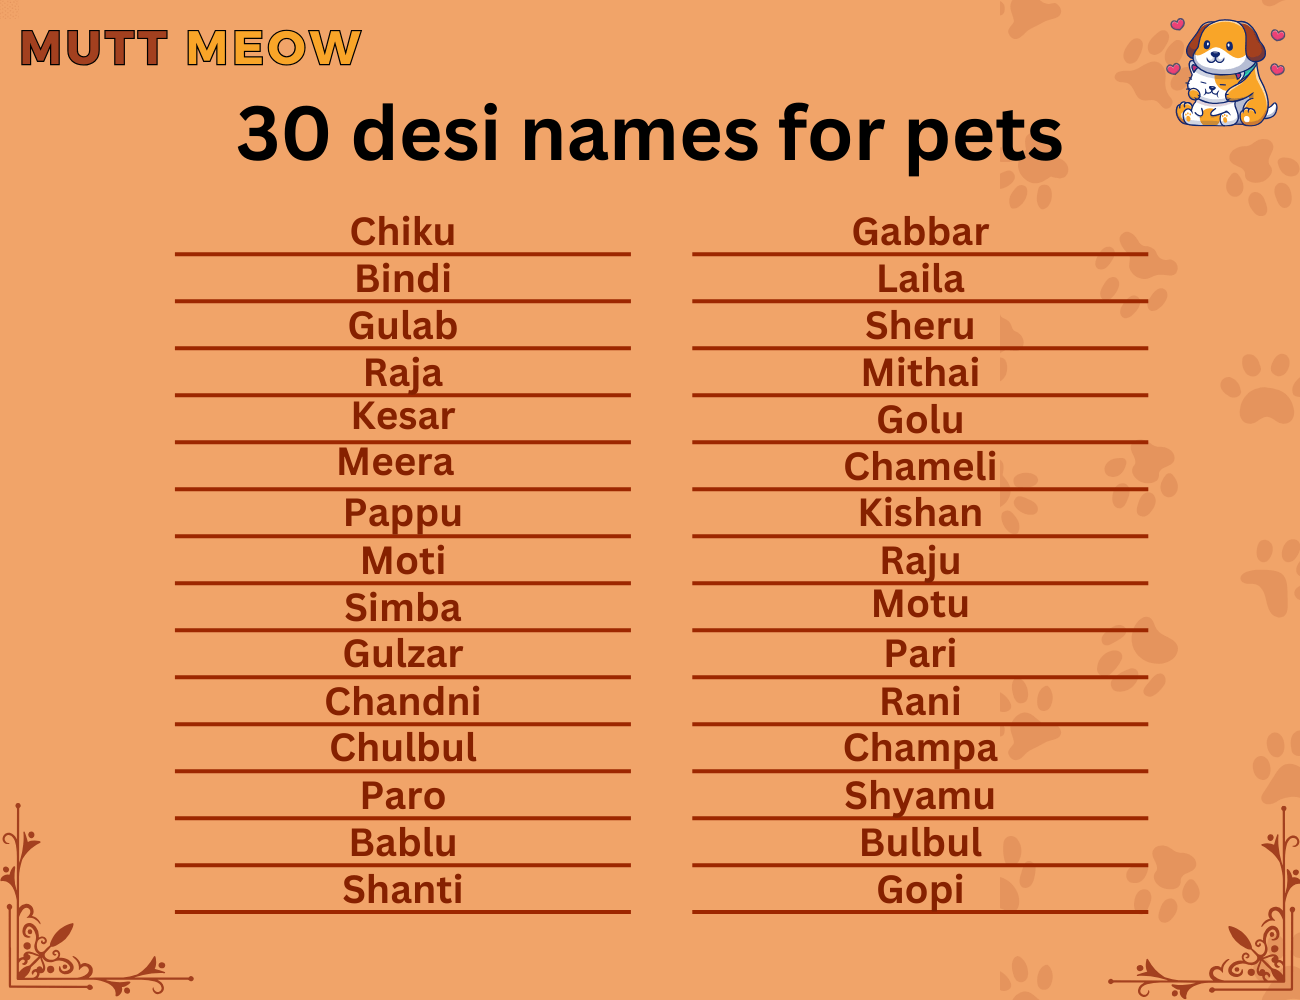 30 desi names for pets